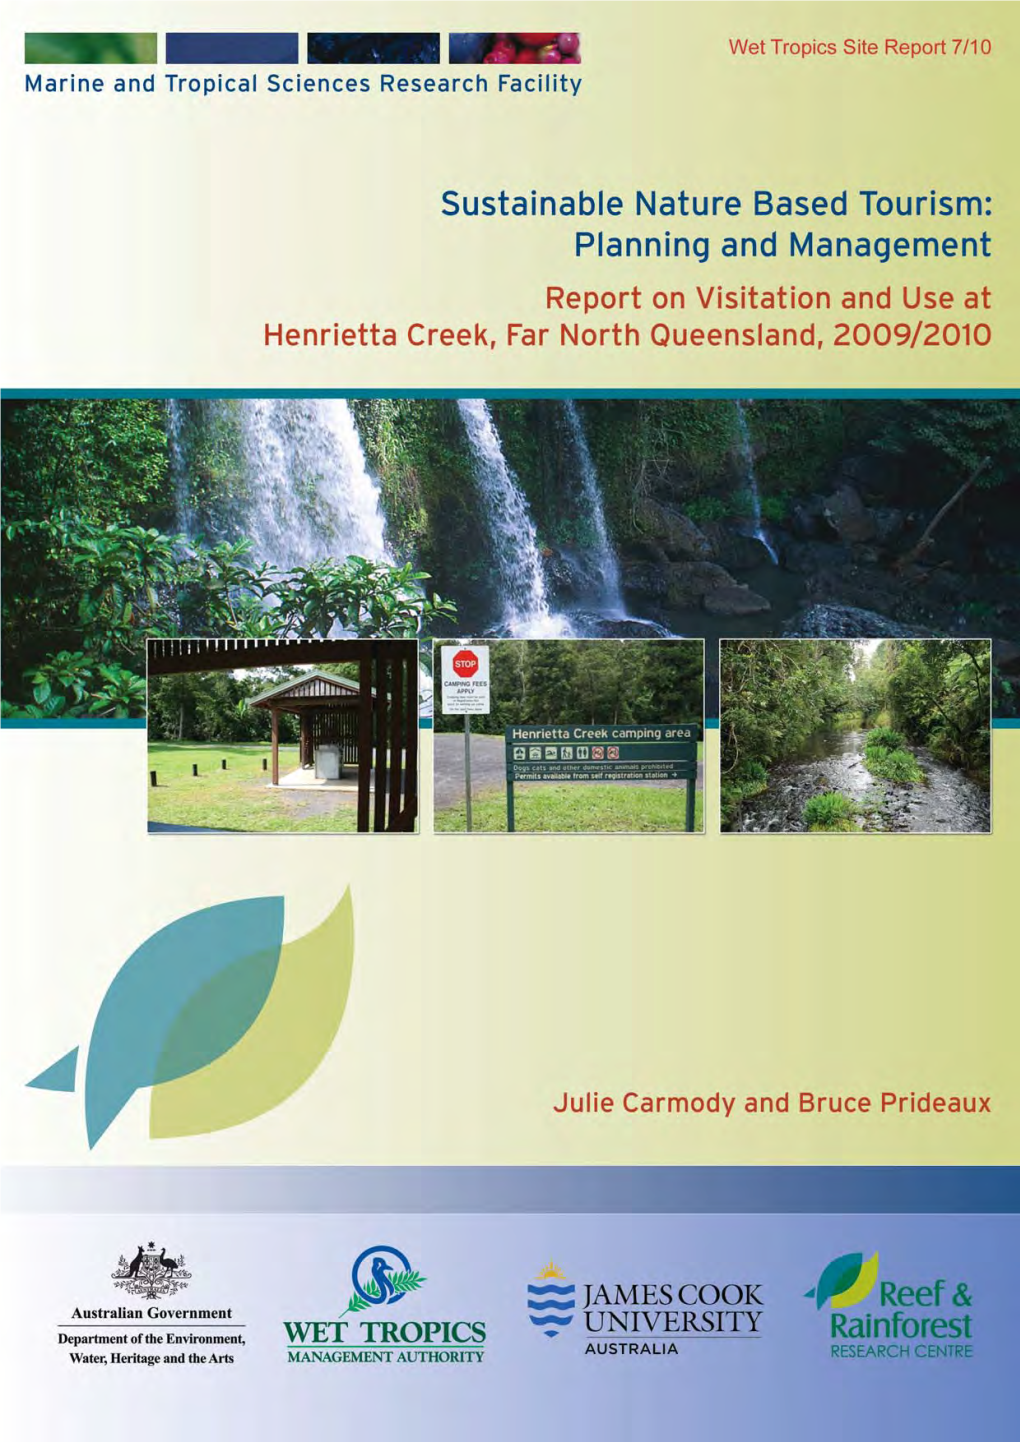 Report on Visitation and Use at Henrietta Creek, Far North Queensland, 2009/2010